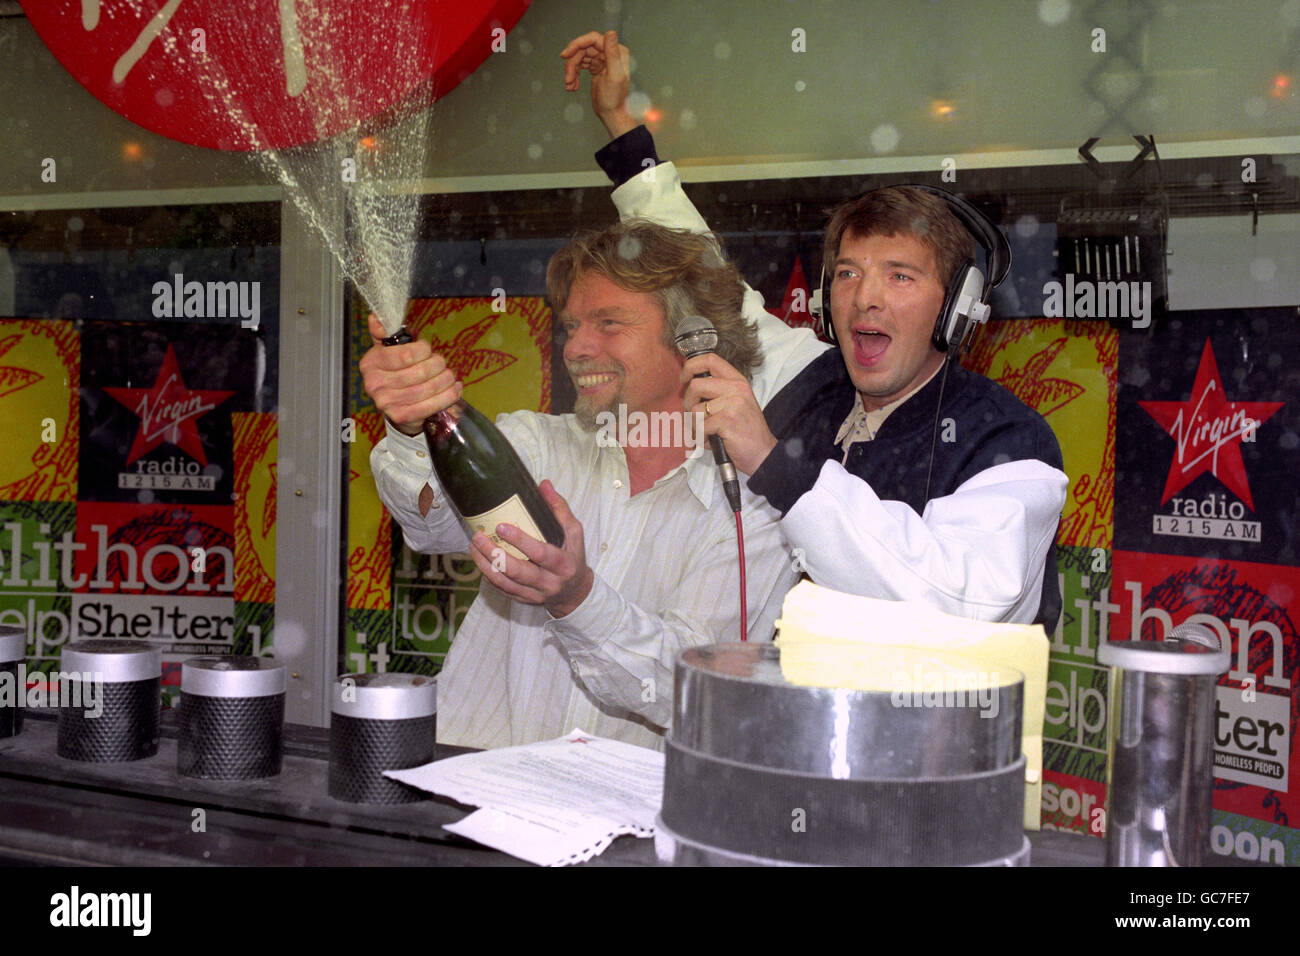 CHAMPAGNE LIFT OFF FOR VIRGIN 1215, THE NEW NATIONAL RADIO STATION LAUNCHED IN MANCHESTER BY RICHARD BRANSON WITH ONE OF THE STATION'S PRESENTERS, RUSS WILLIAMS. Stock Photo